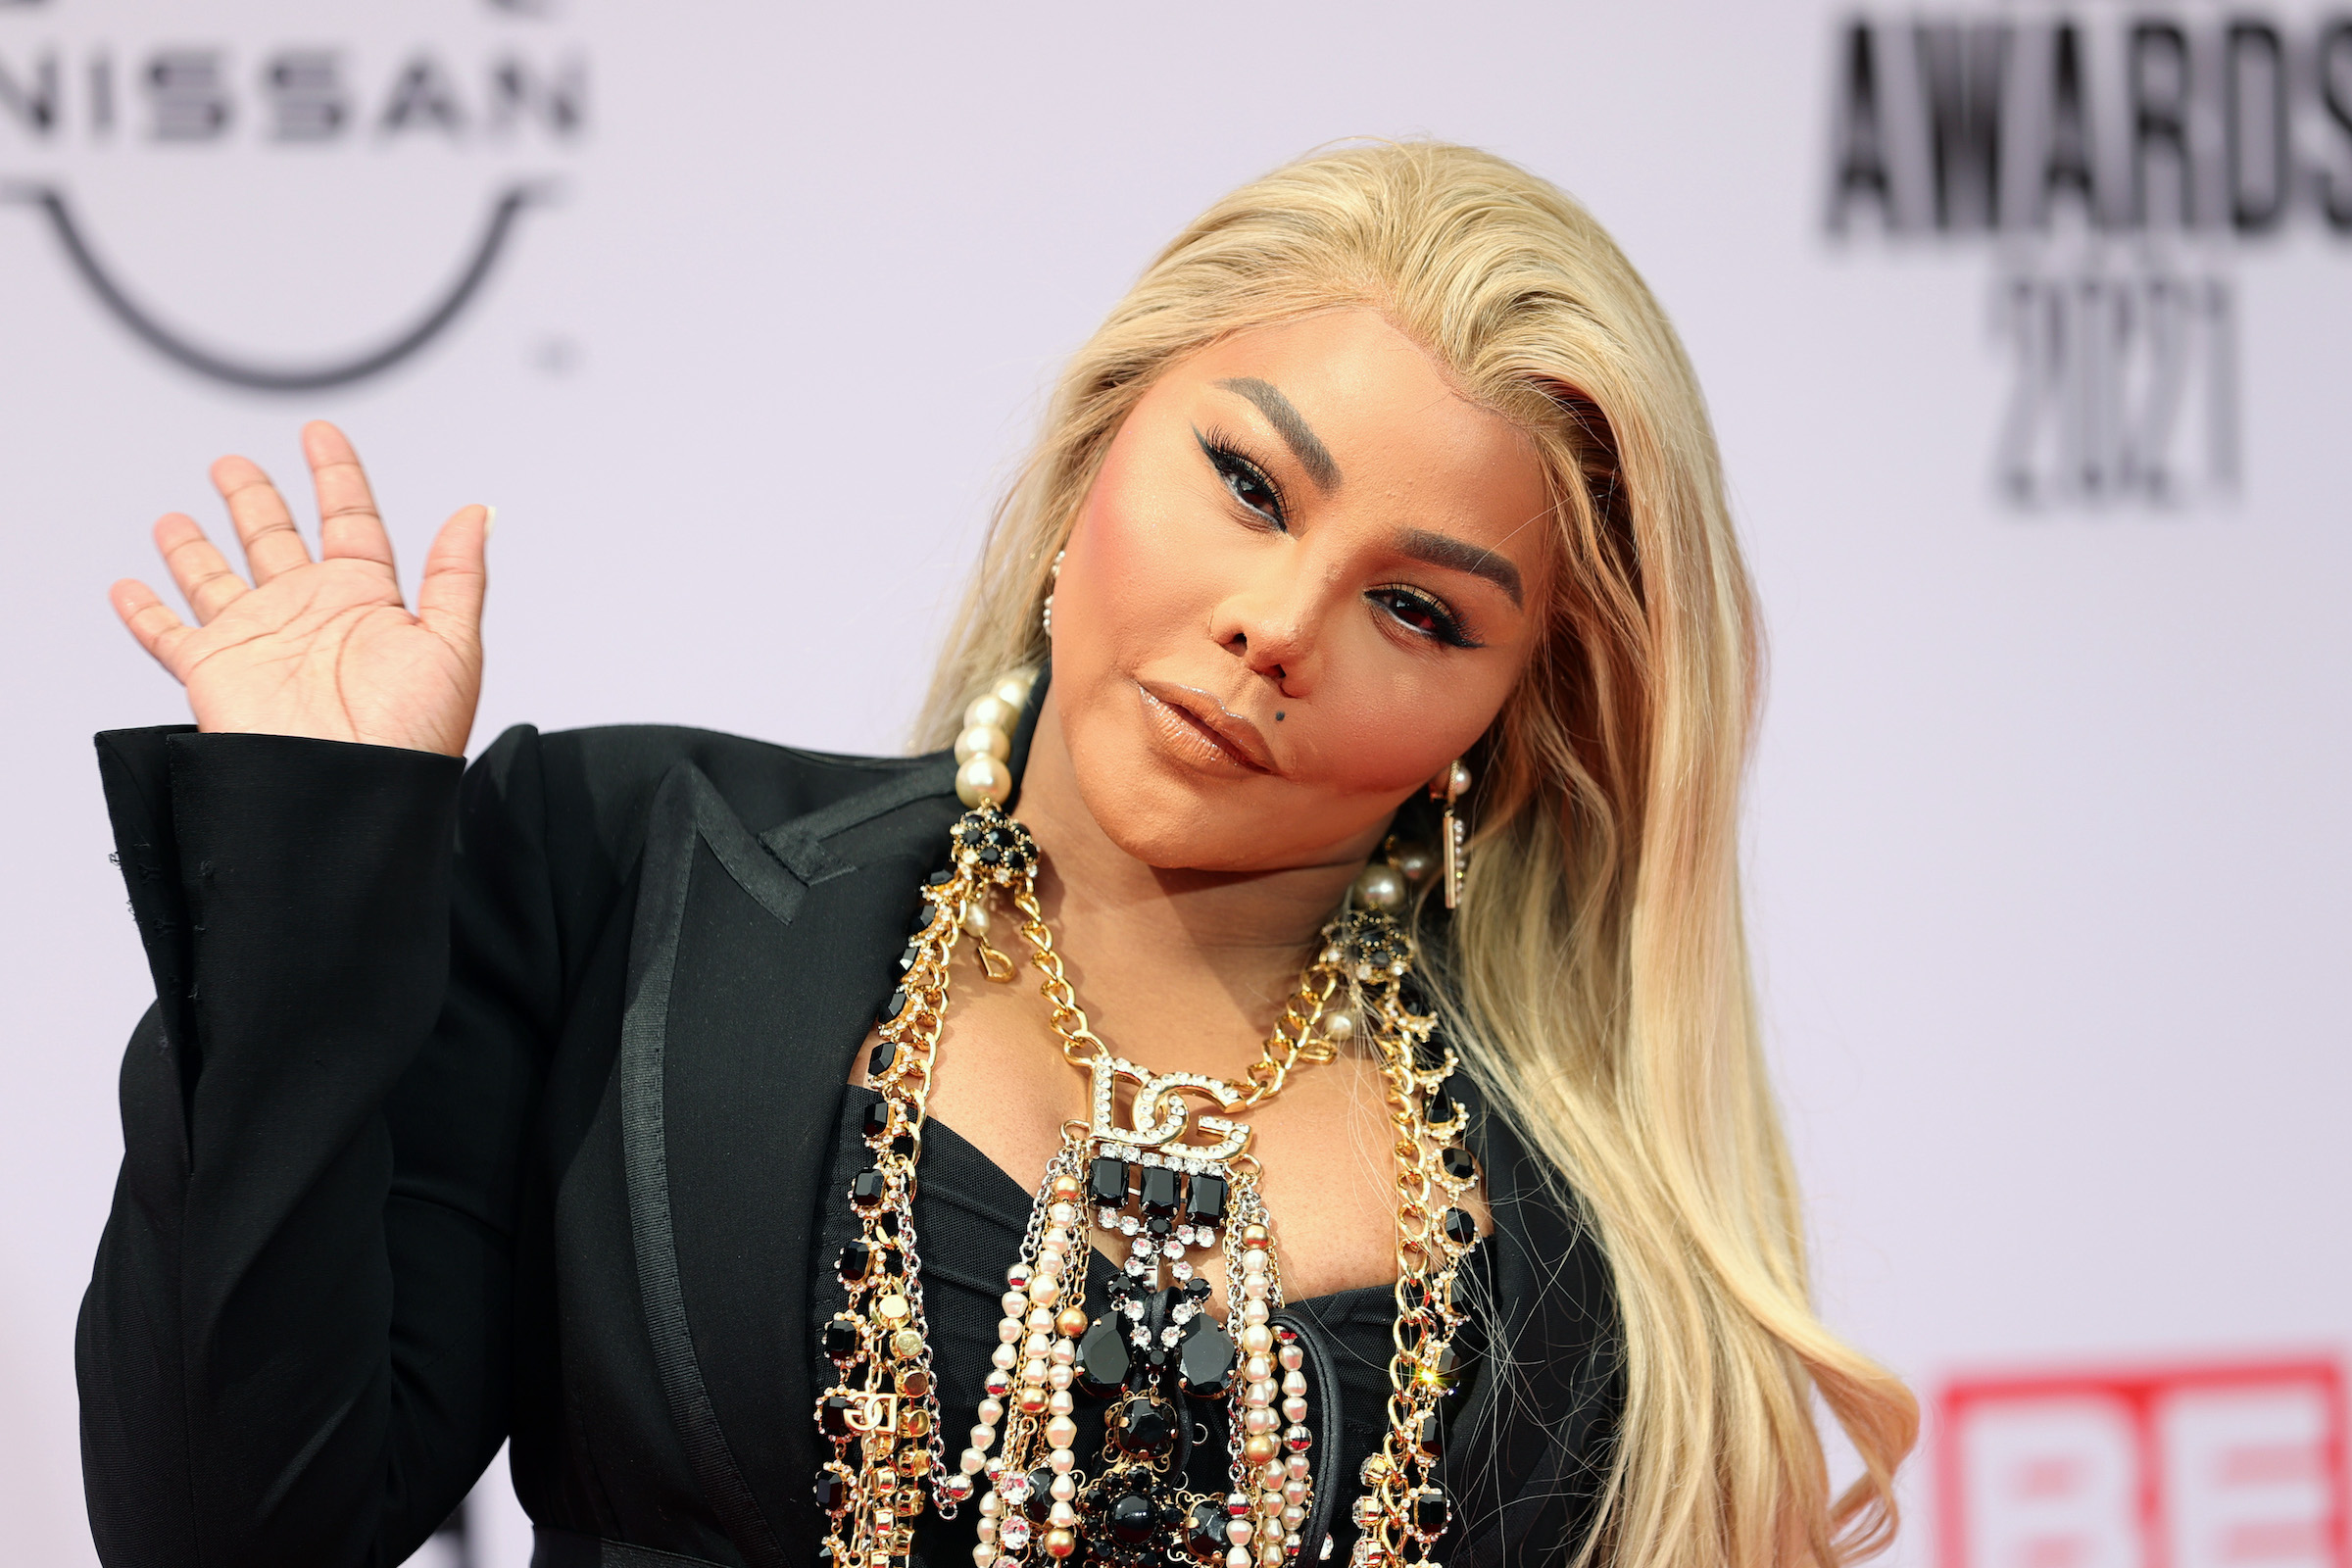 Lil' Kim attends the BET Awards 2021